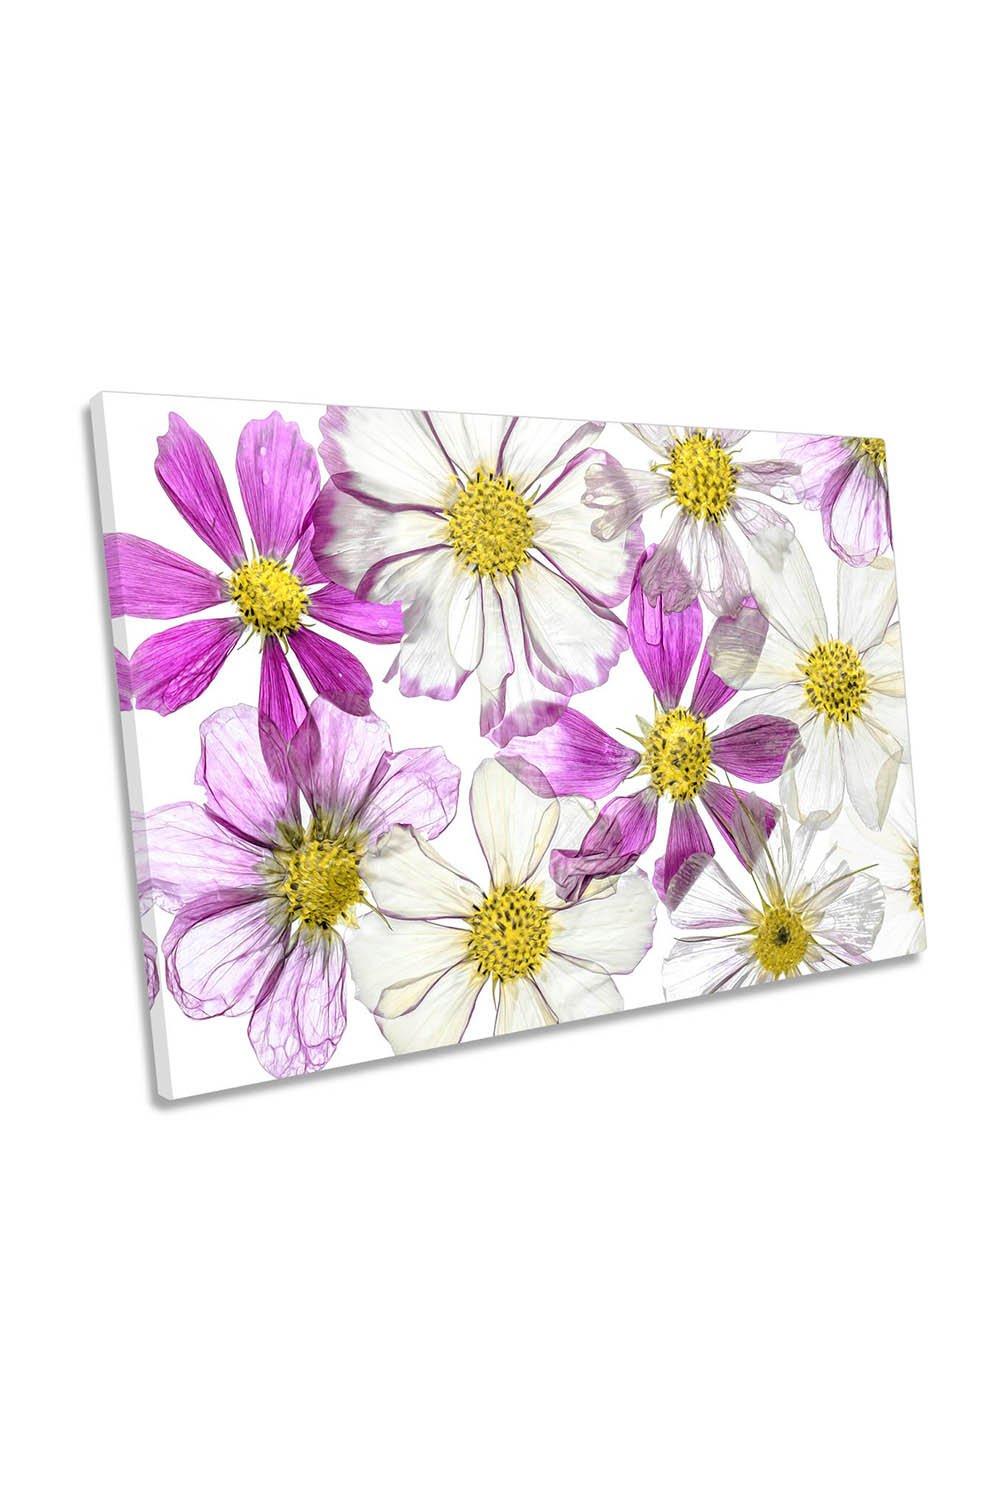 Summer Flowers Pink Floral White Canvas Wall Art Picture Print